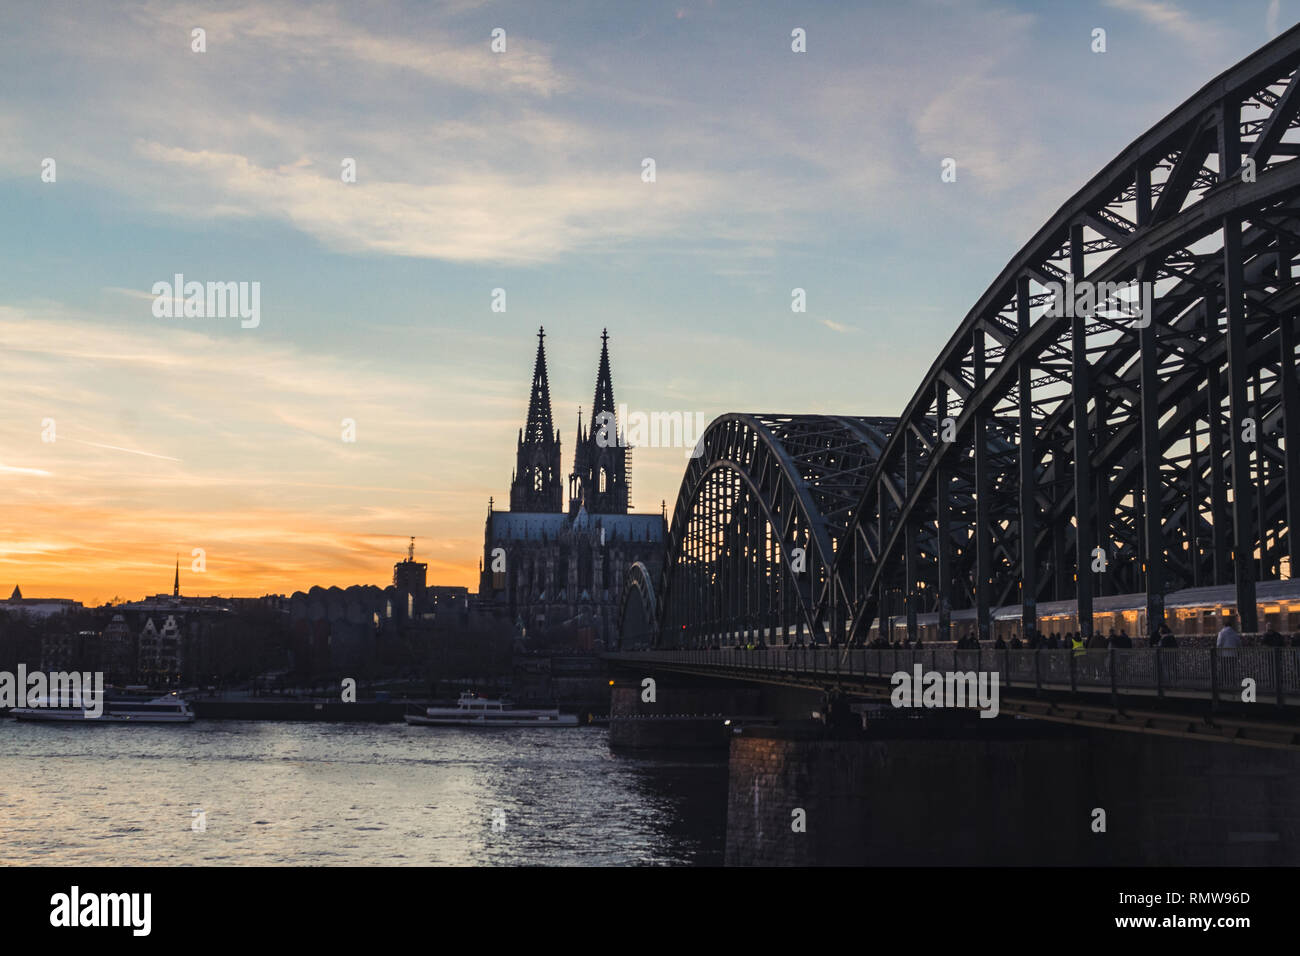 Cologne skyline with Cologne Cathedral and Hohenzollern bridge at sunset with cloudy sky Stock Photo